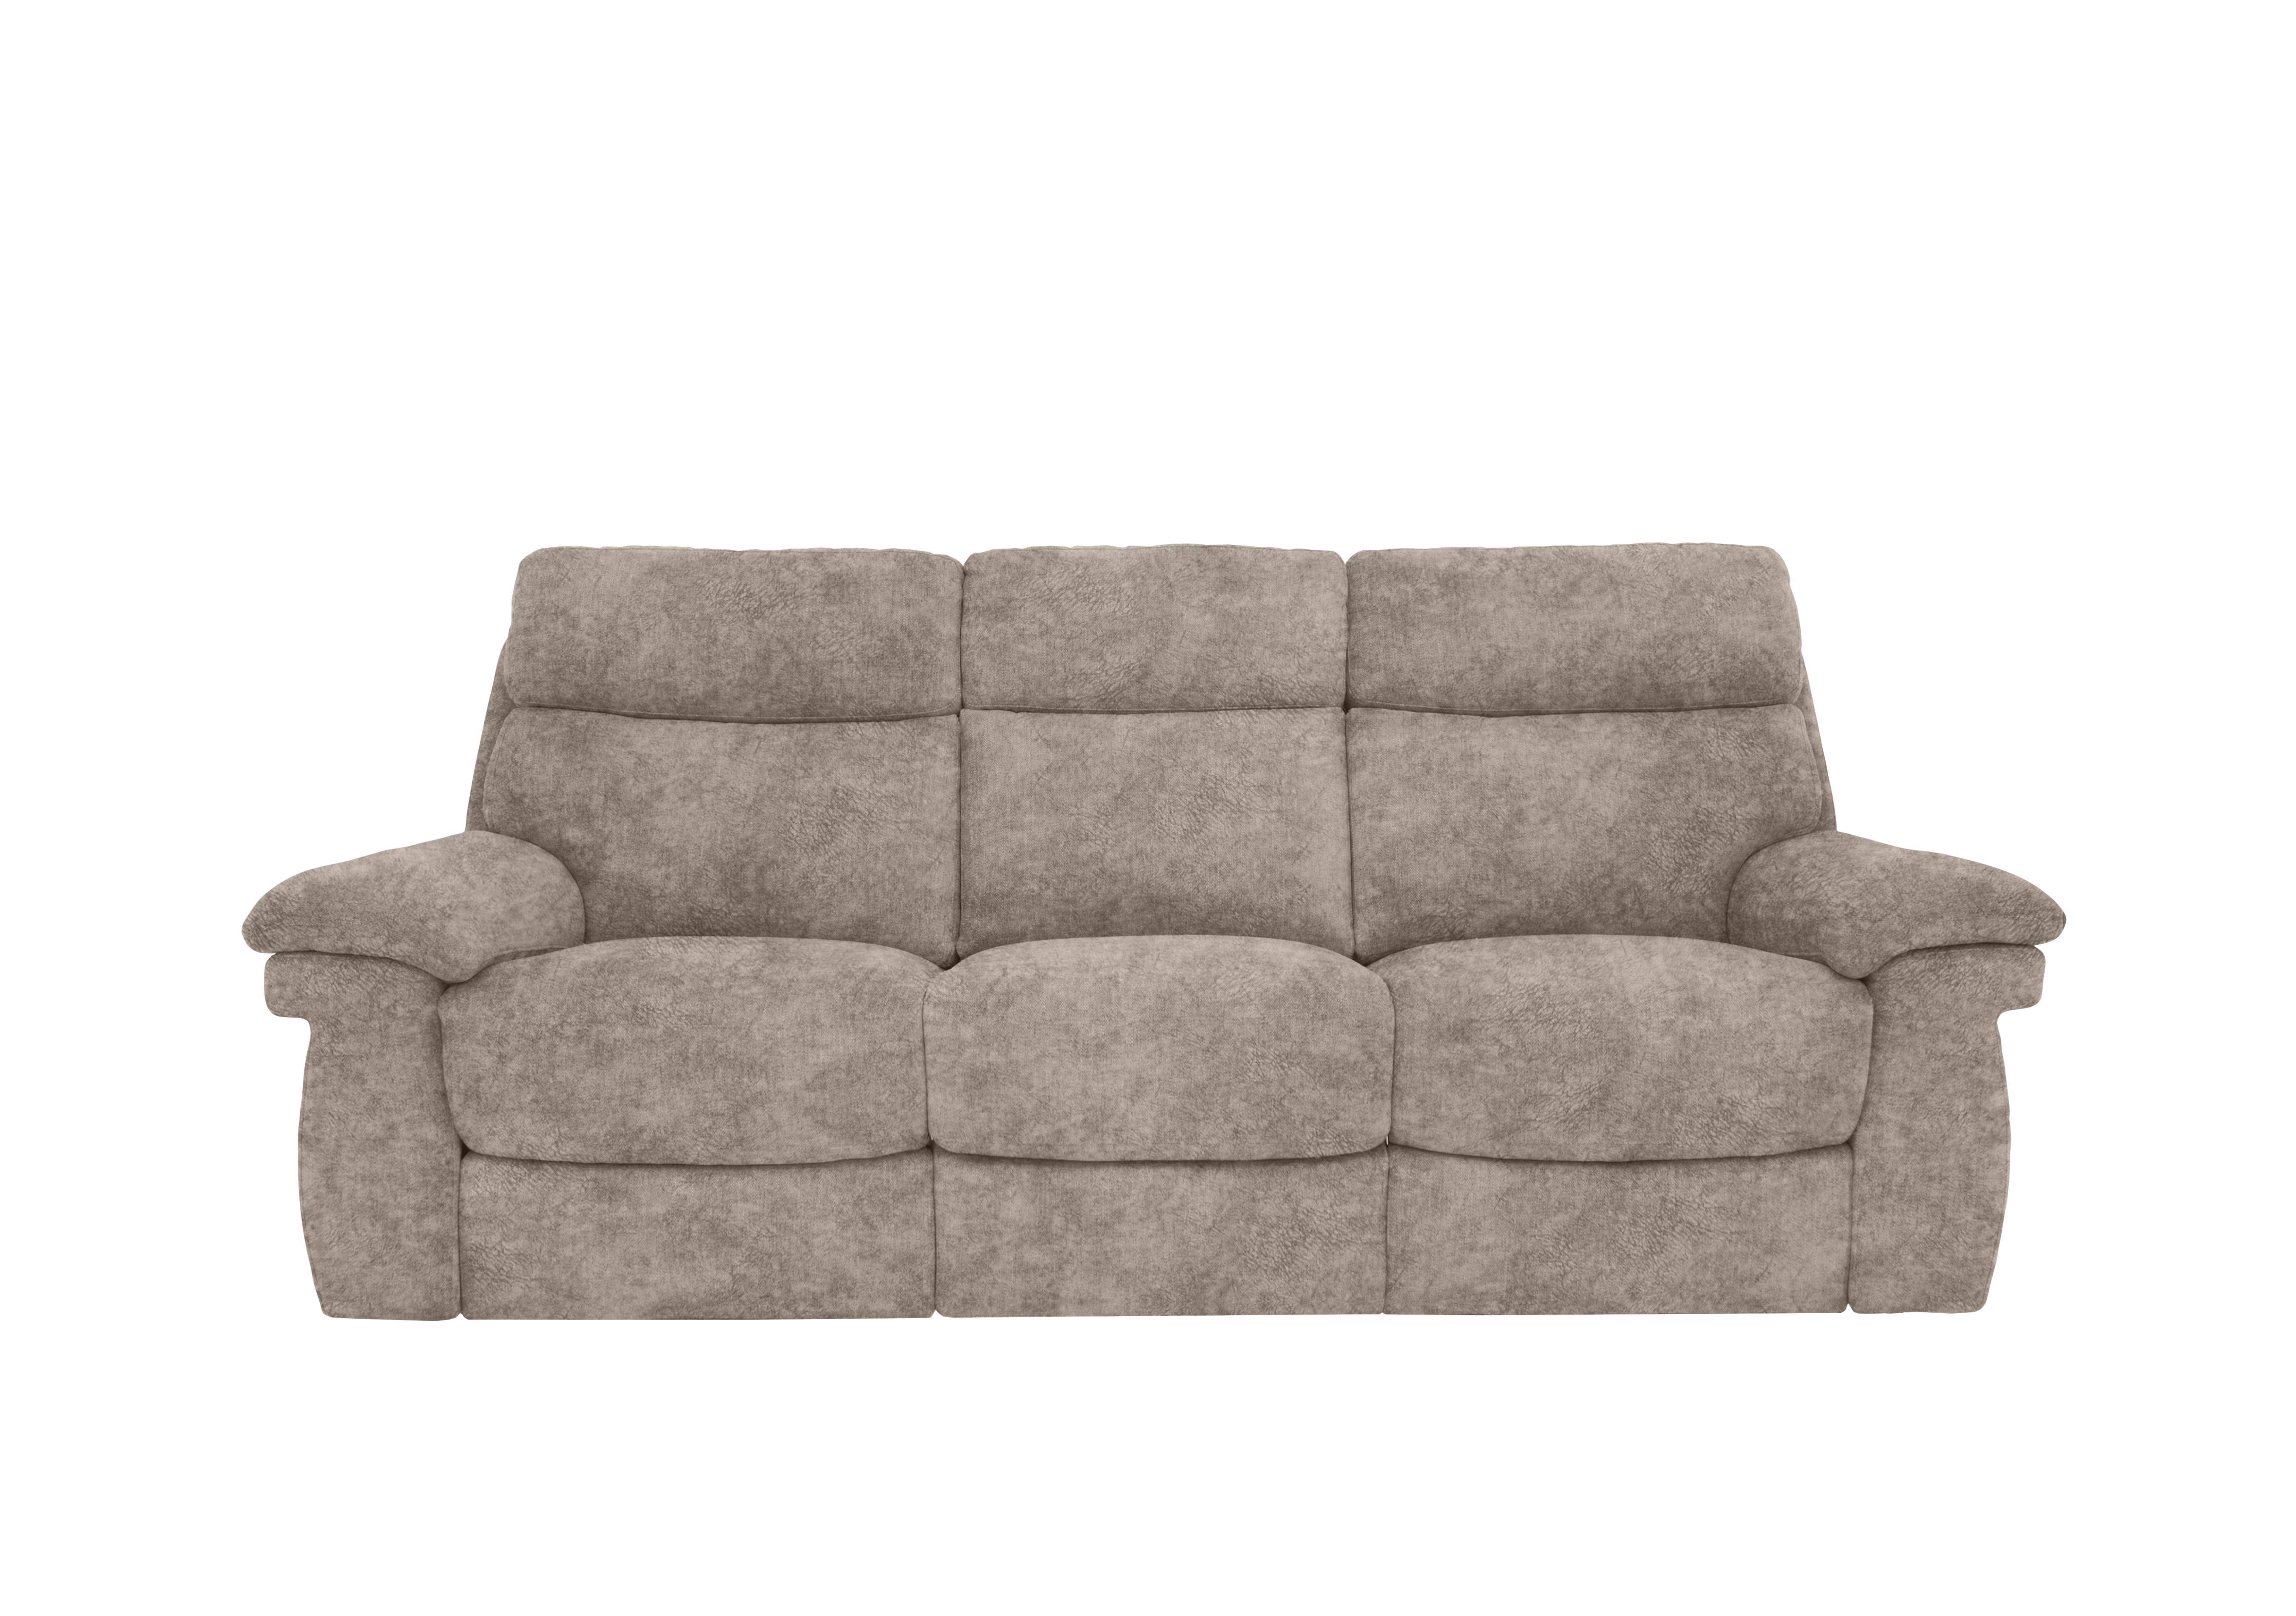 Serene 3 Seater Fabric Power Recliner Sofa with Drop Down Table in Bfa-Bnn-R29 Mink on Furniture Village